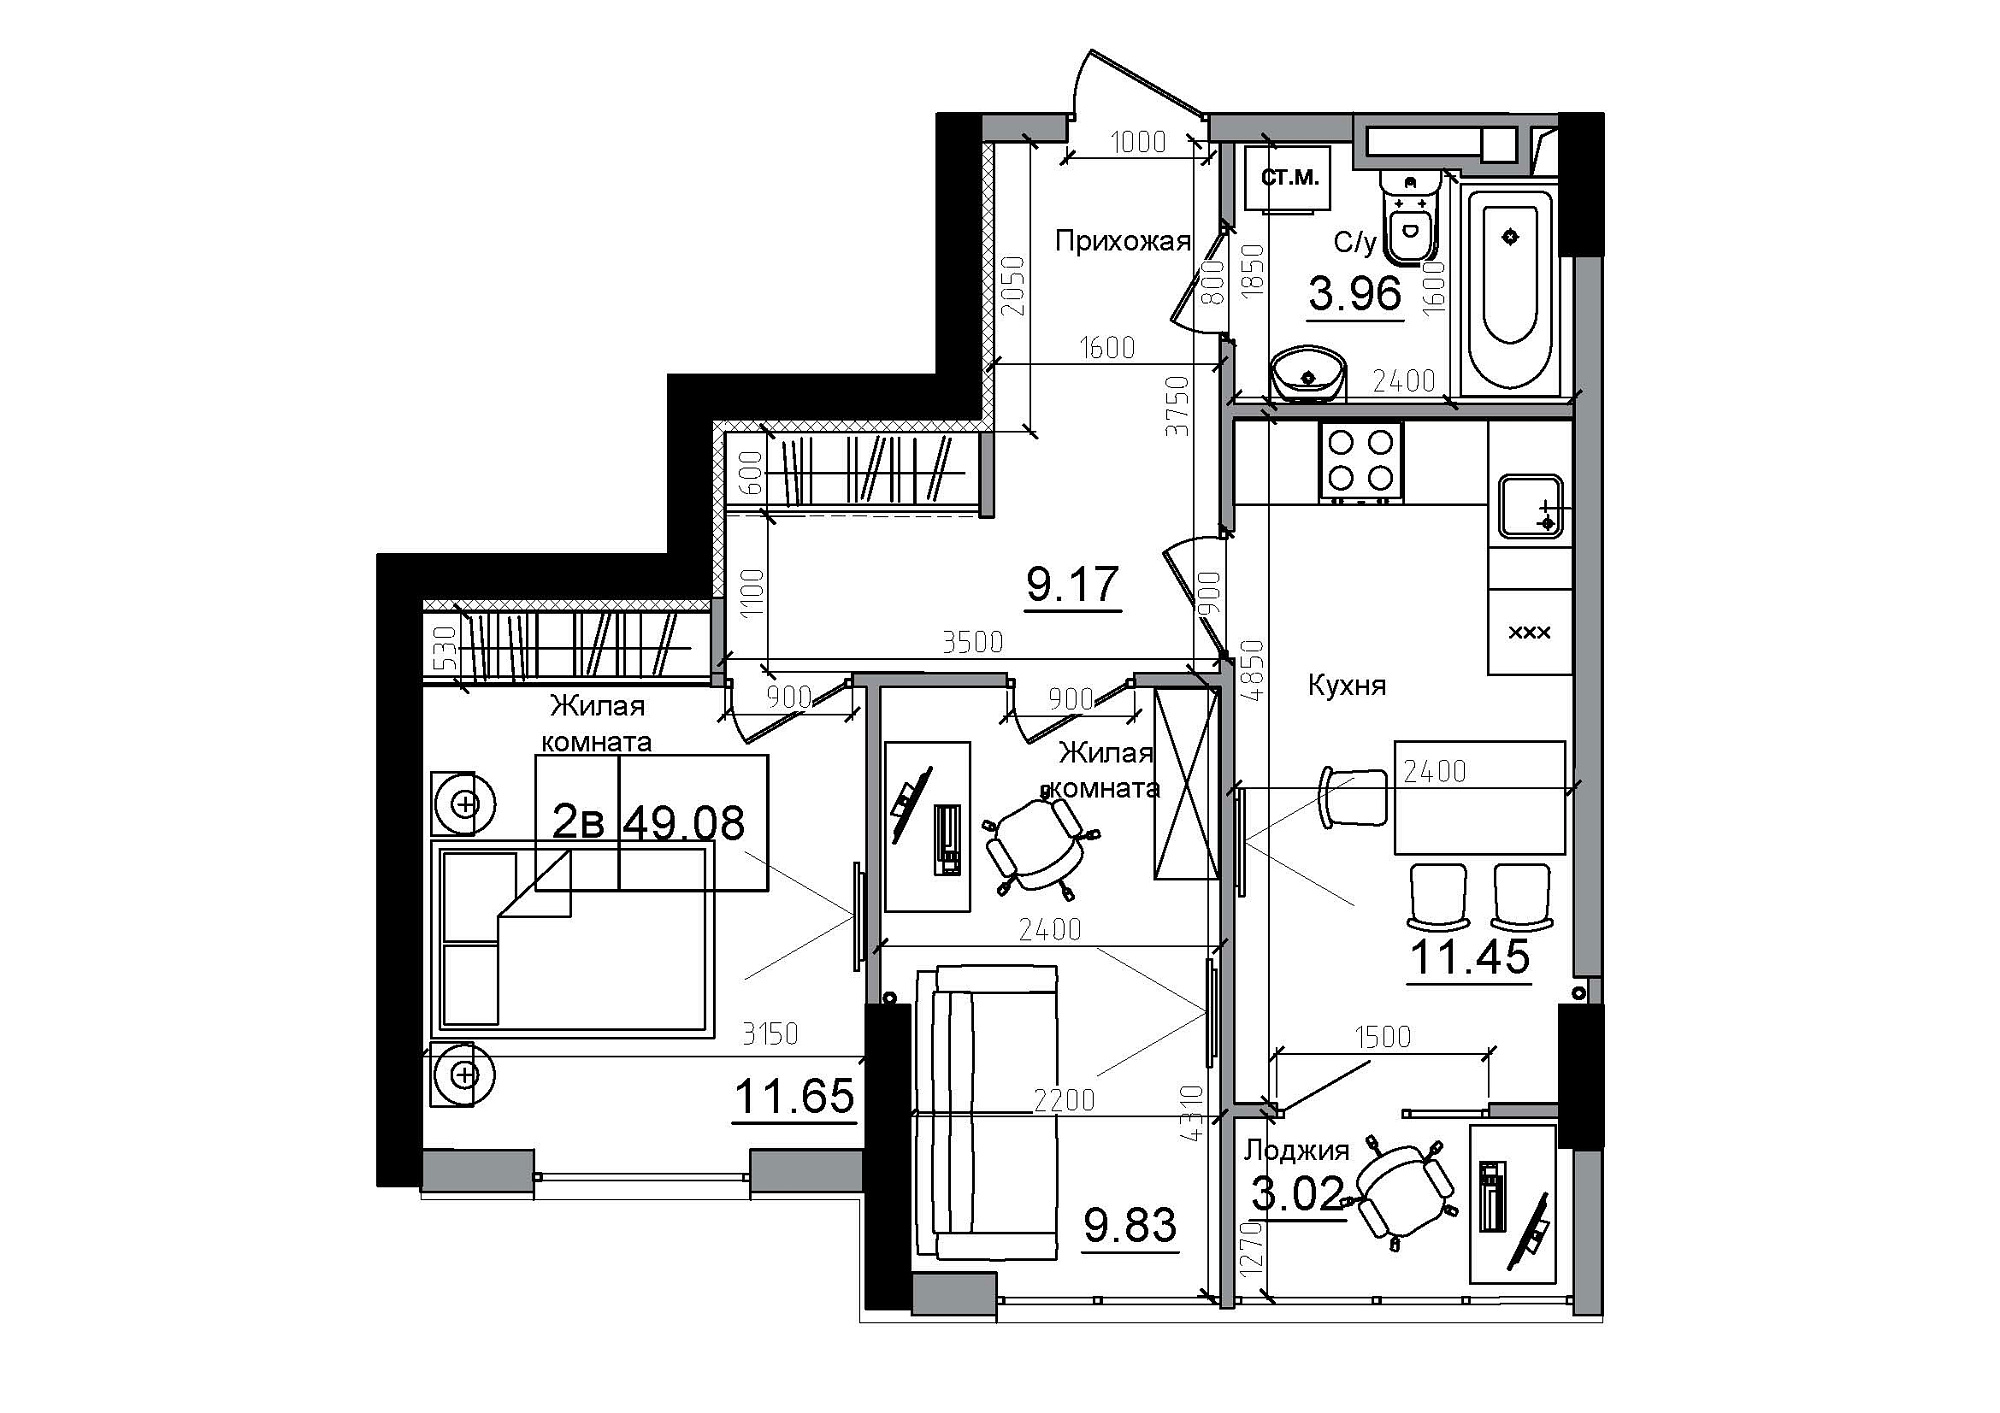 Planning 2-rm flats area 49.08m2, AB-12-09/00015.